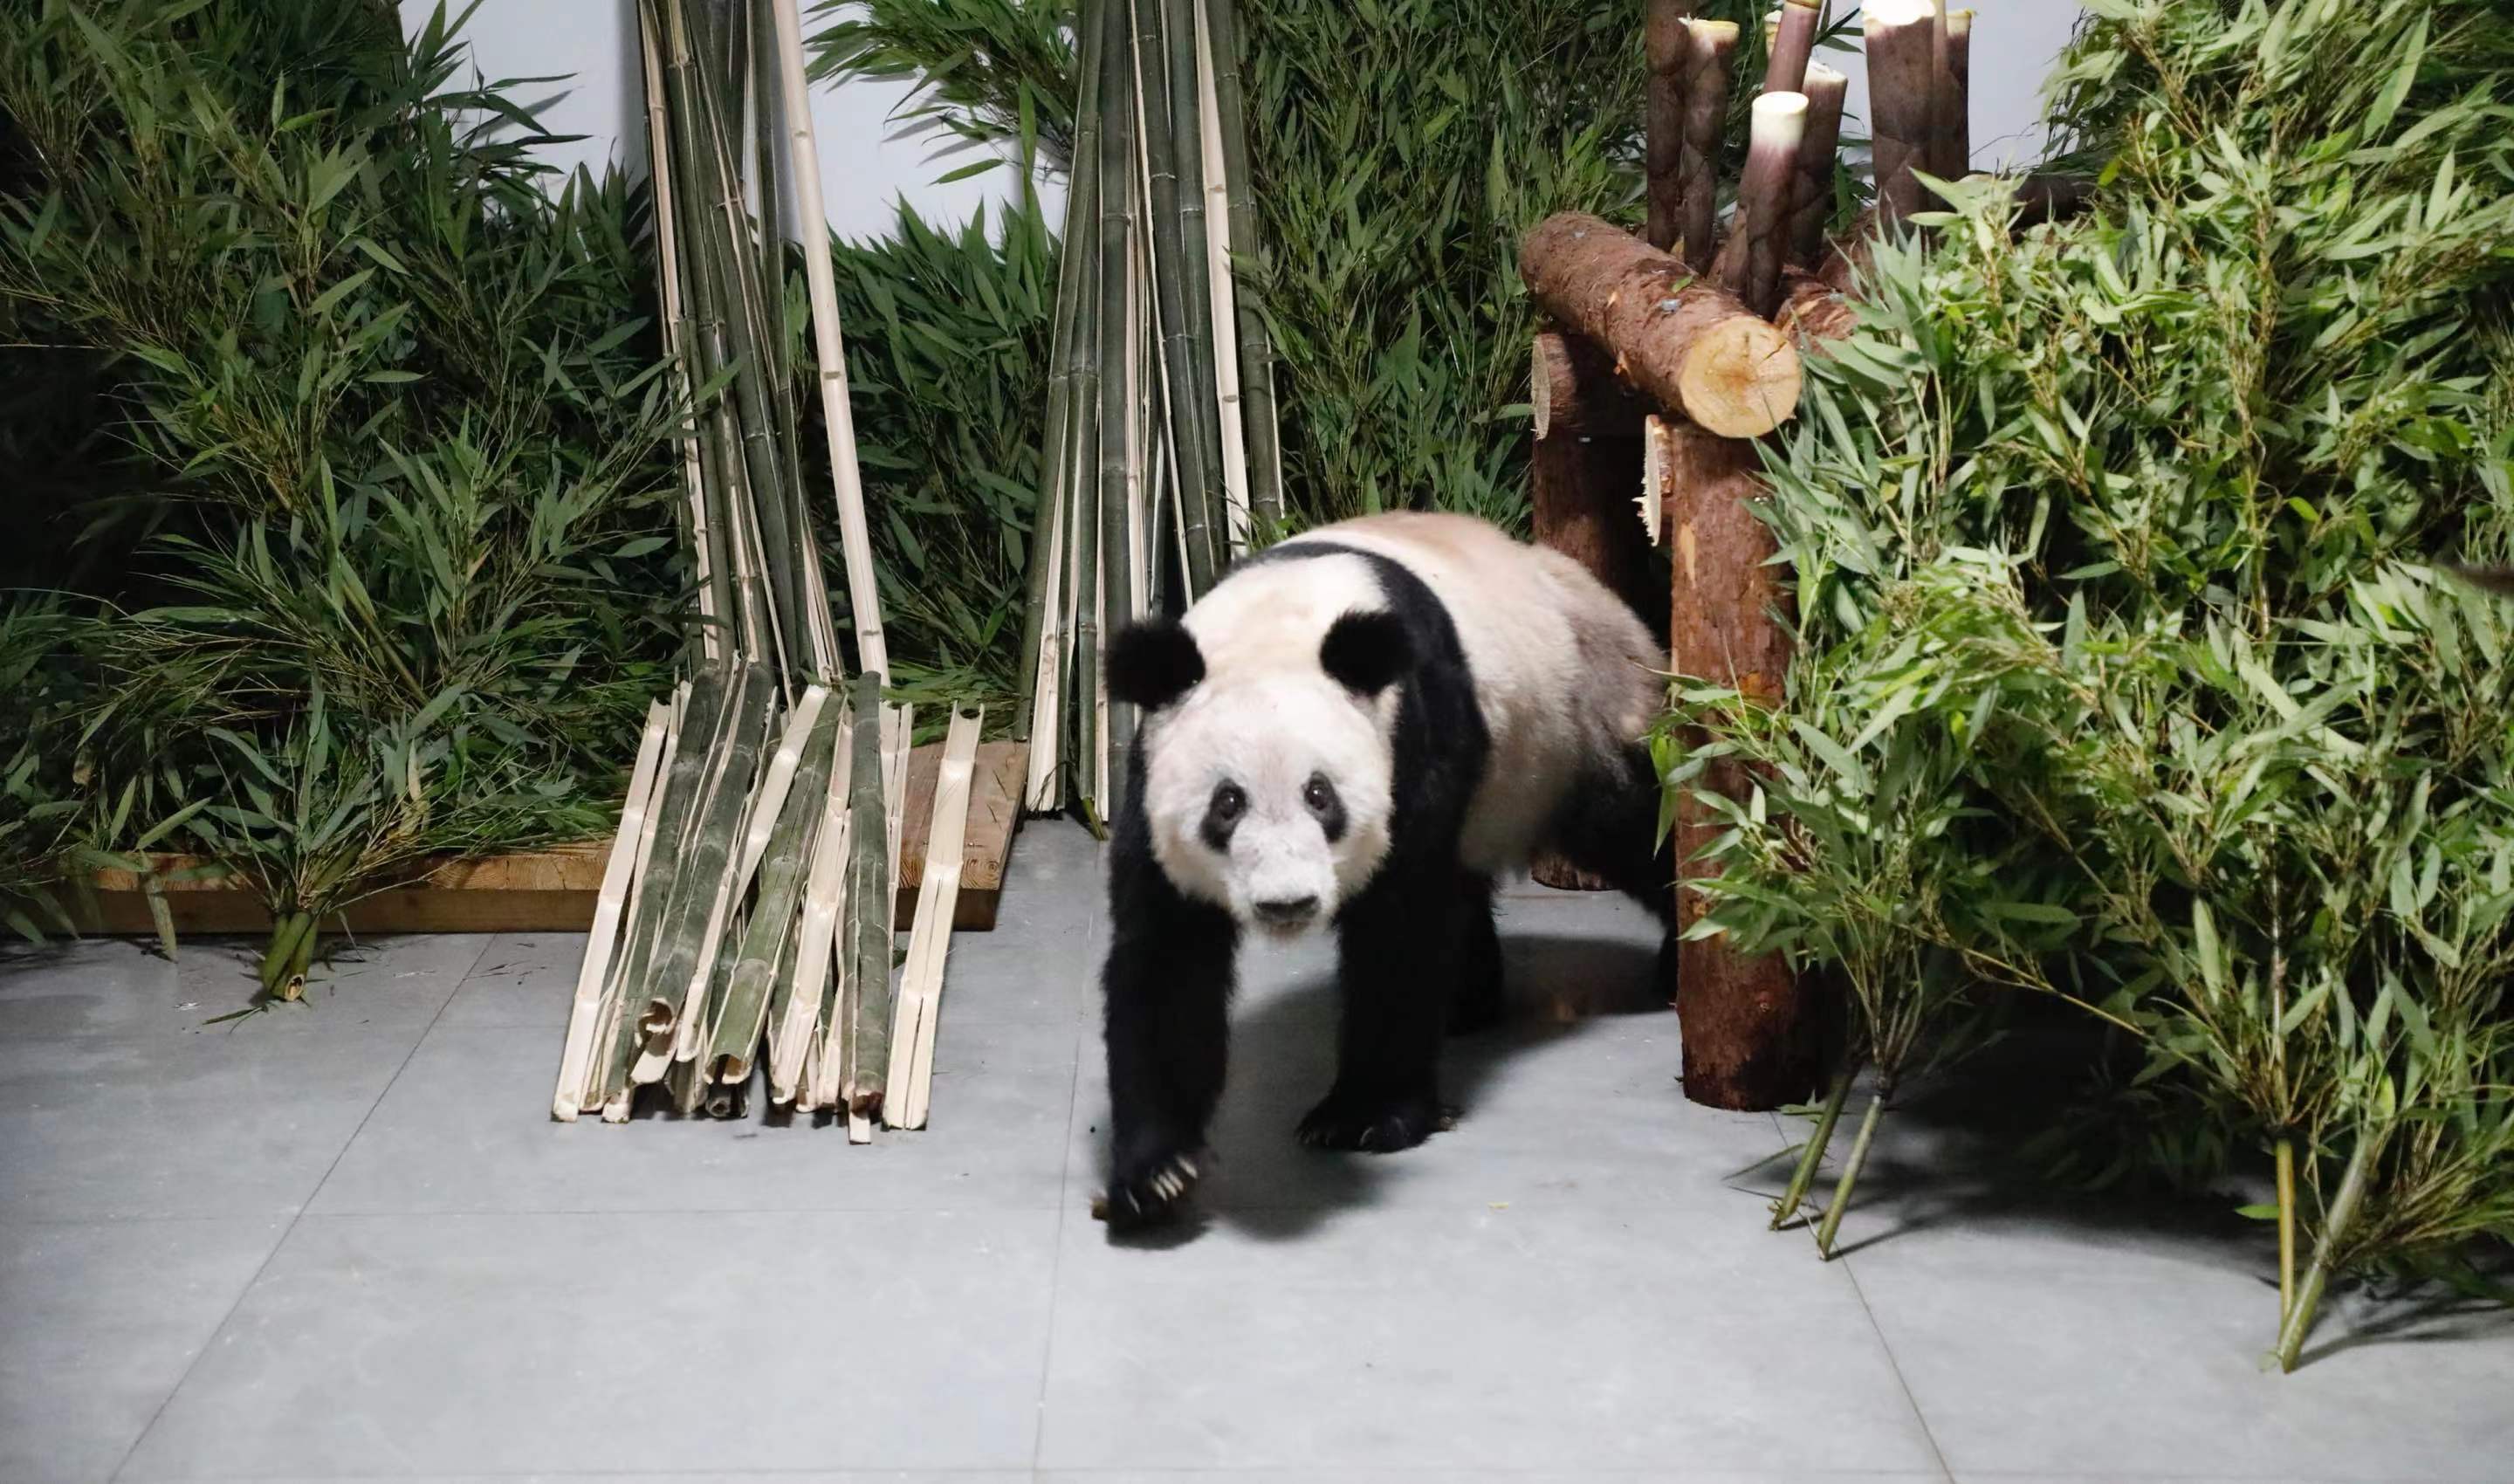 Ya Ya is surrounded by bamboo leaves and shoots at the Beijing Zoo, May 29, 2023. /CNSPHOTO